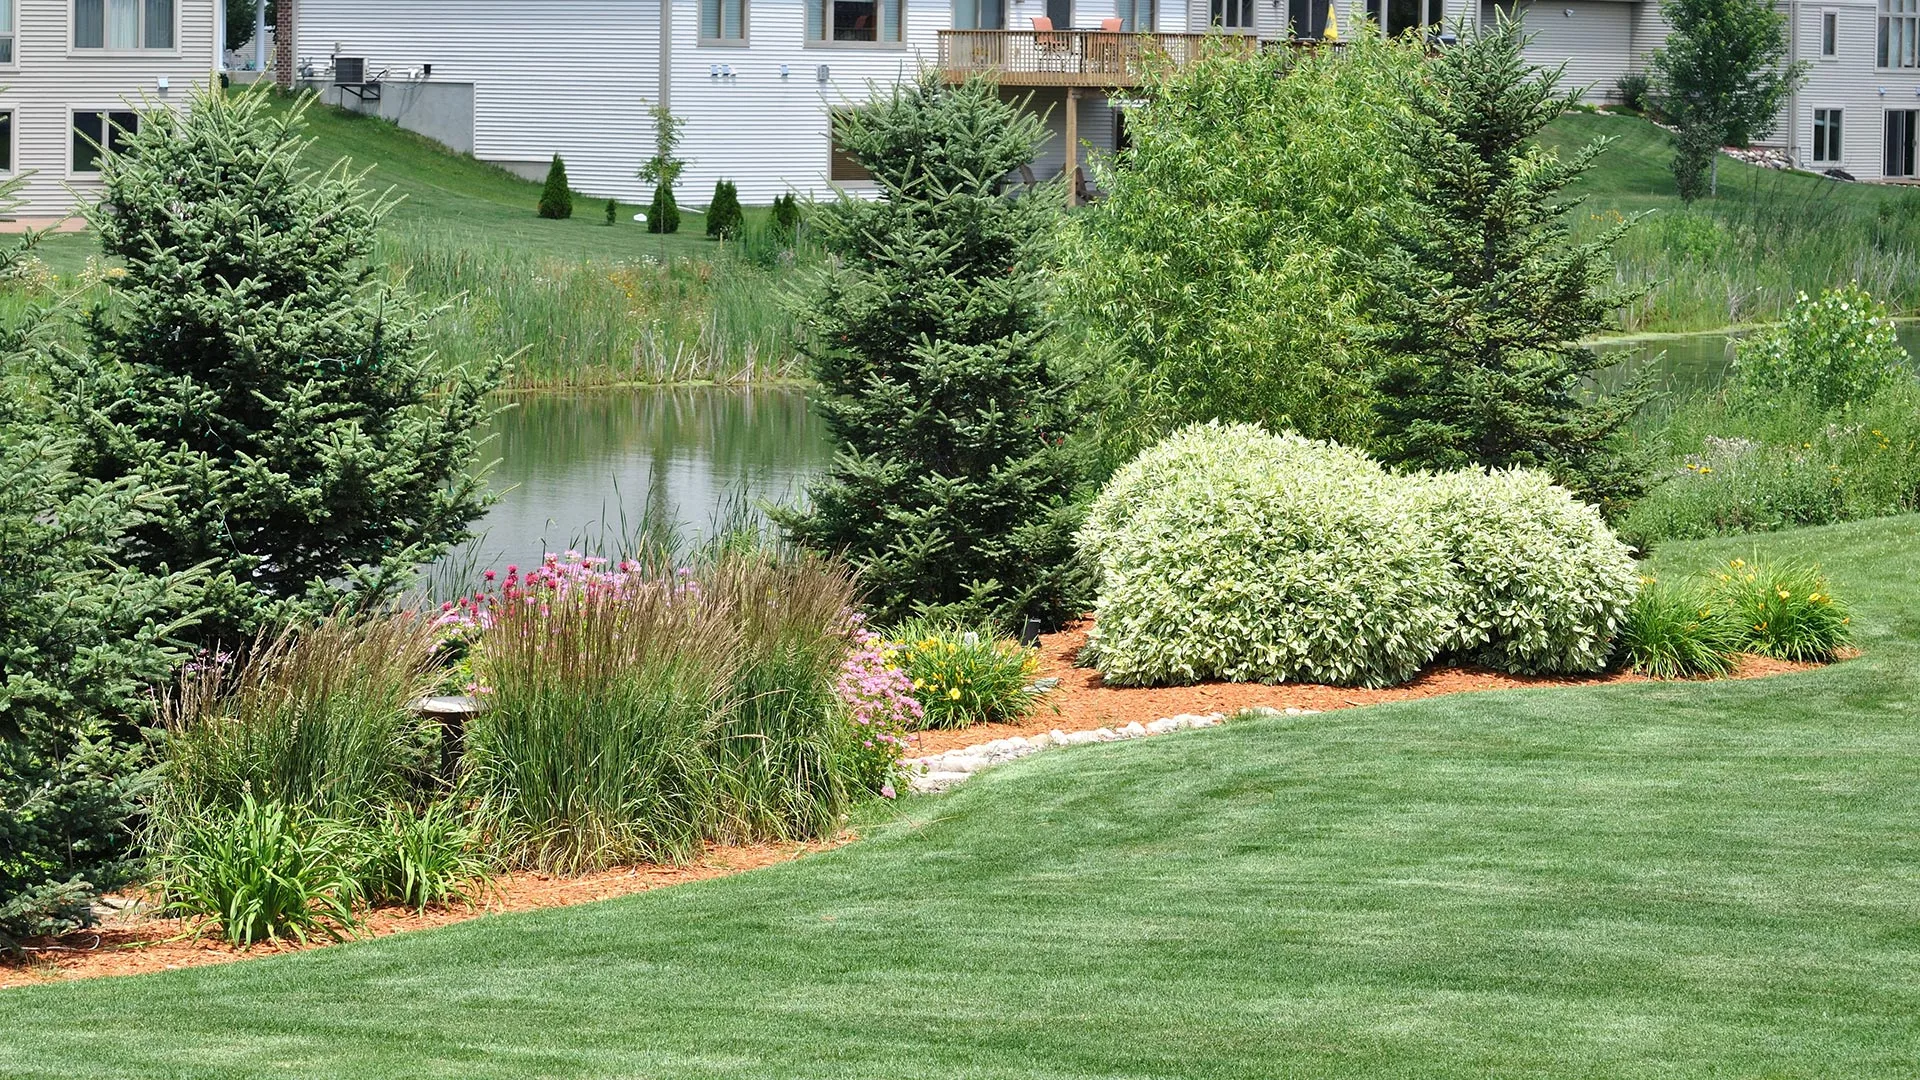 Custom landscaping installed near a body of water at a housing complex in Graham, NC.